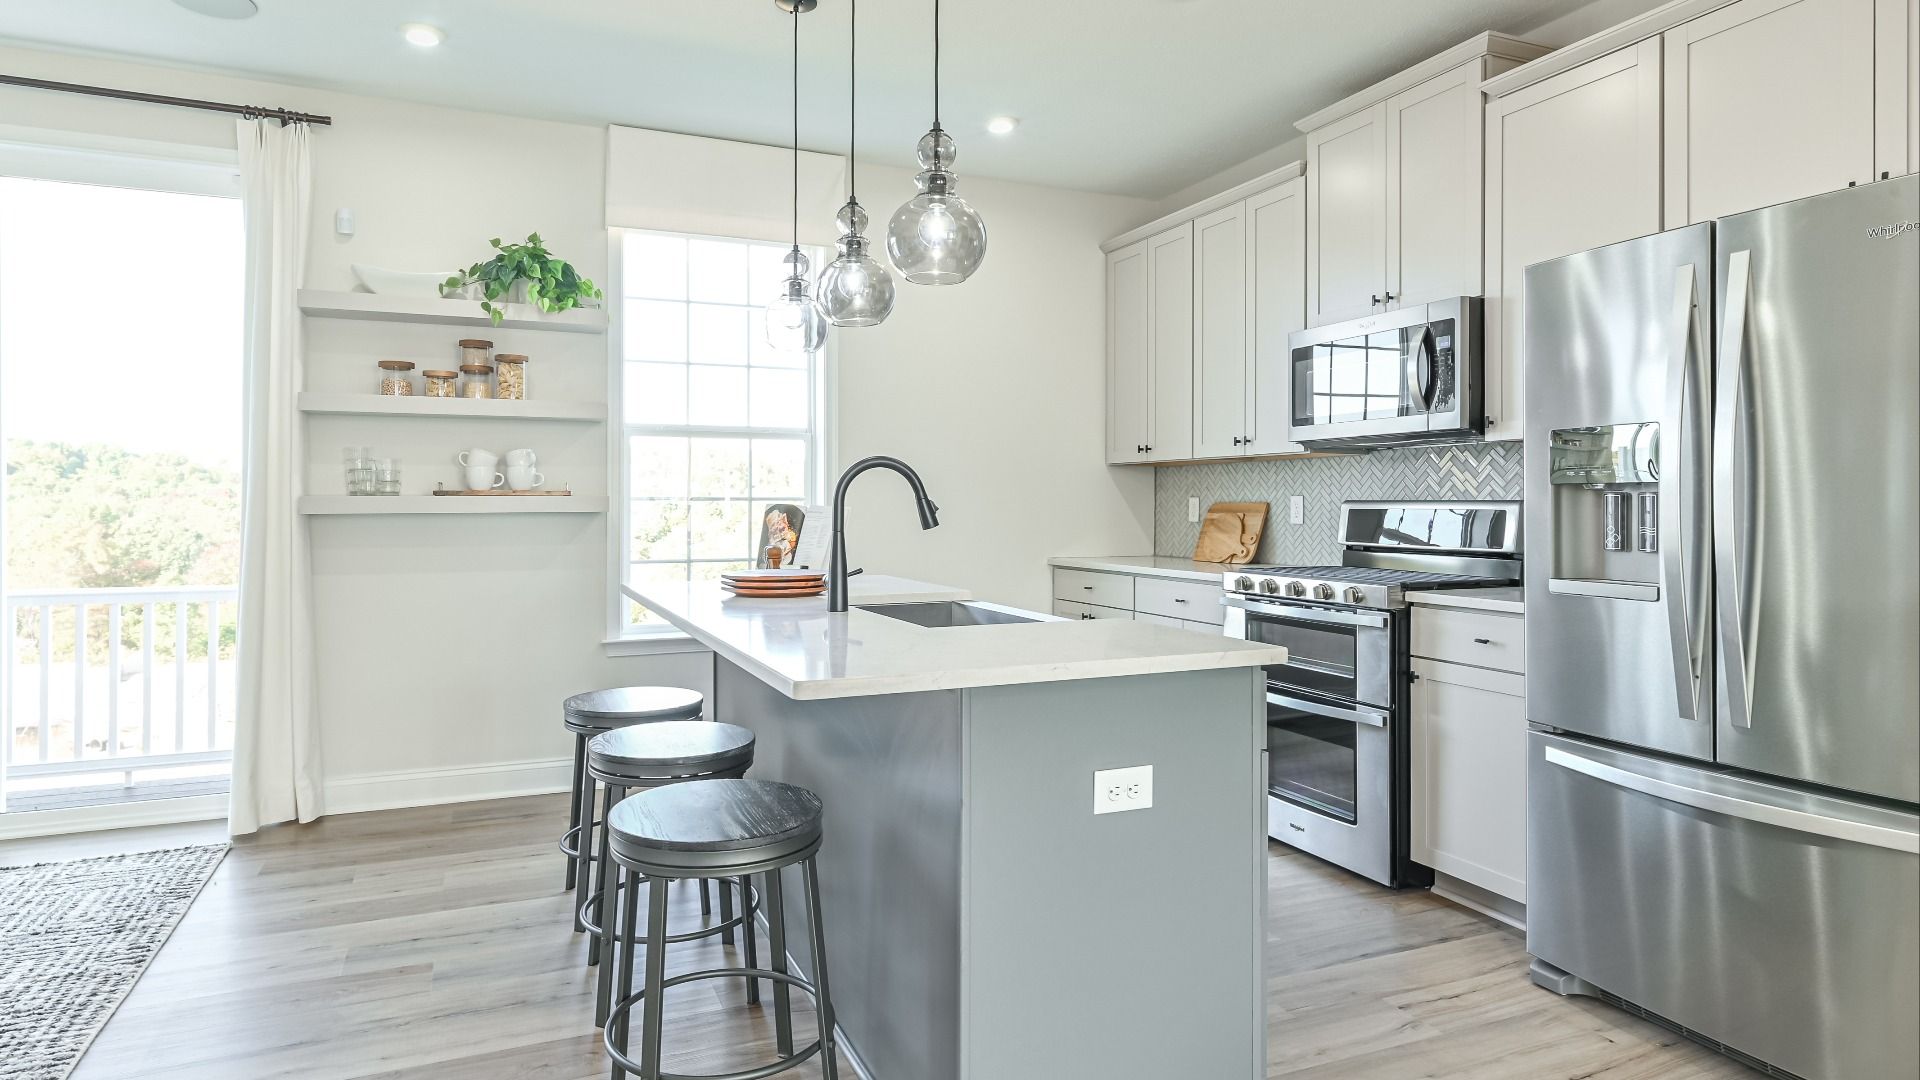 Whitaker II Model at Rolling Hills - Kitchen